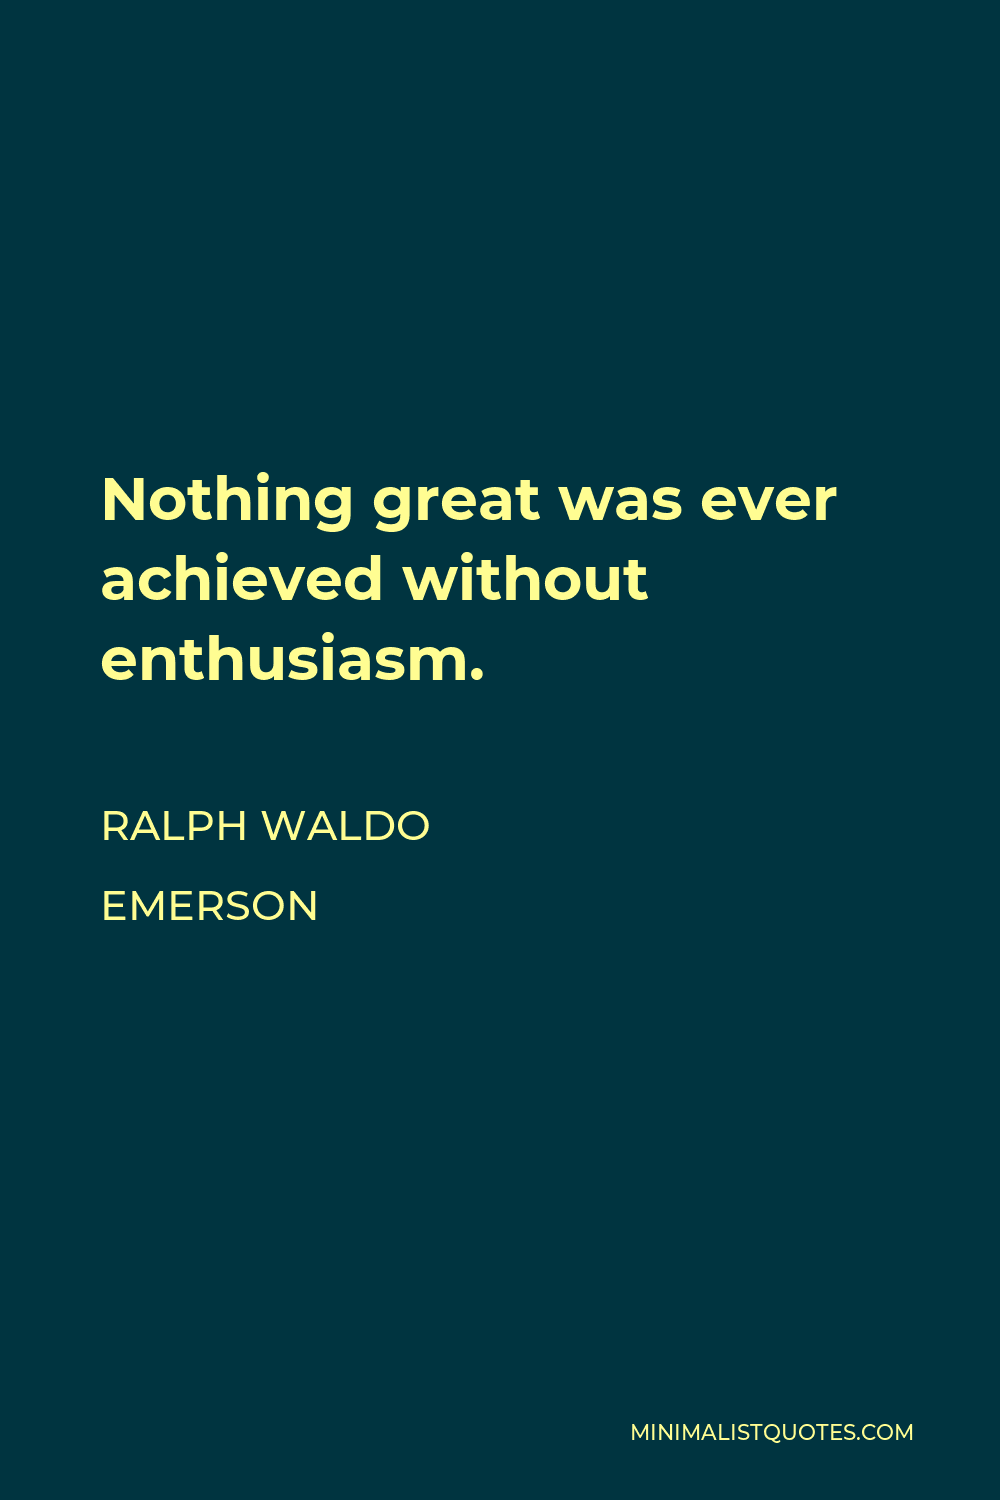 Ralph Waldo Emerson Quote - Nothing great was ever achieved without enthusiasm.